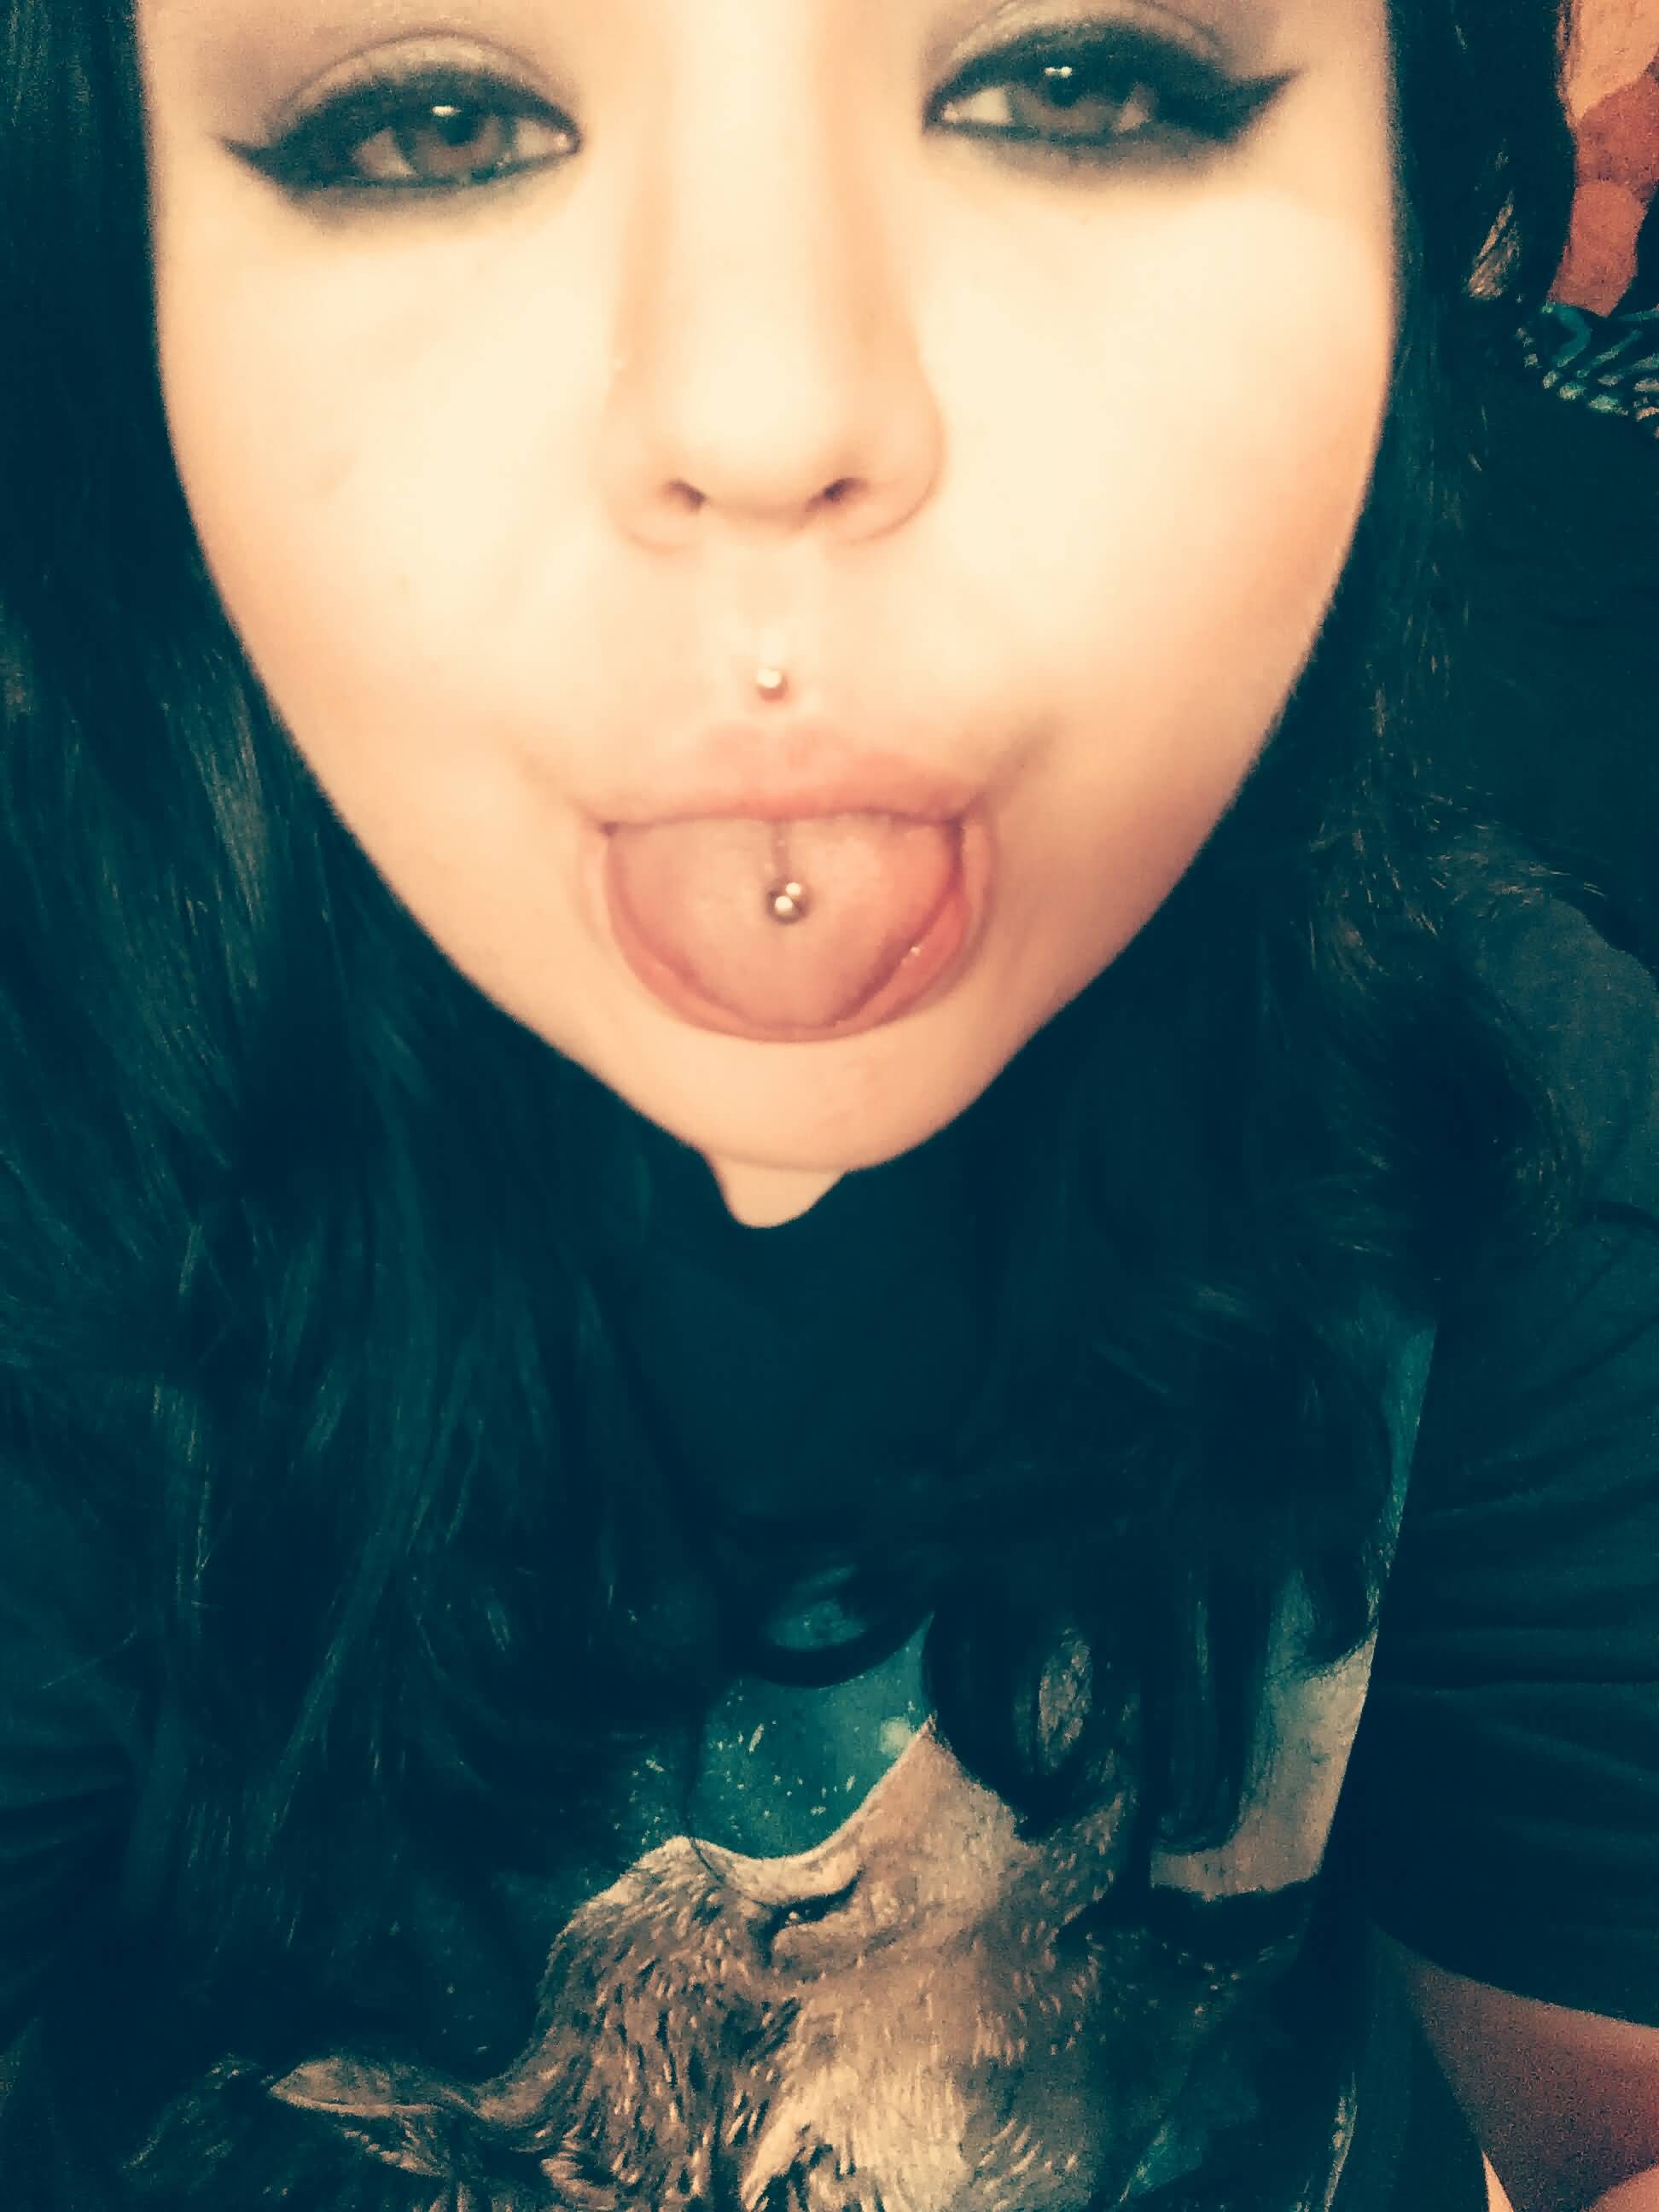 Girl Showing Her Tongue Piercing And Medusa Piercing